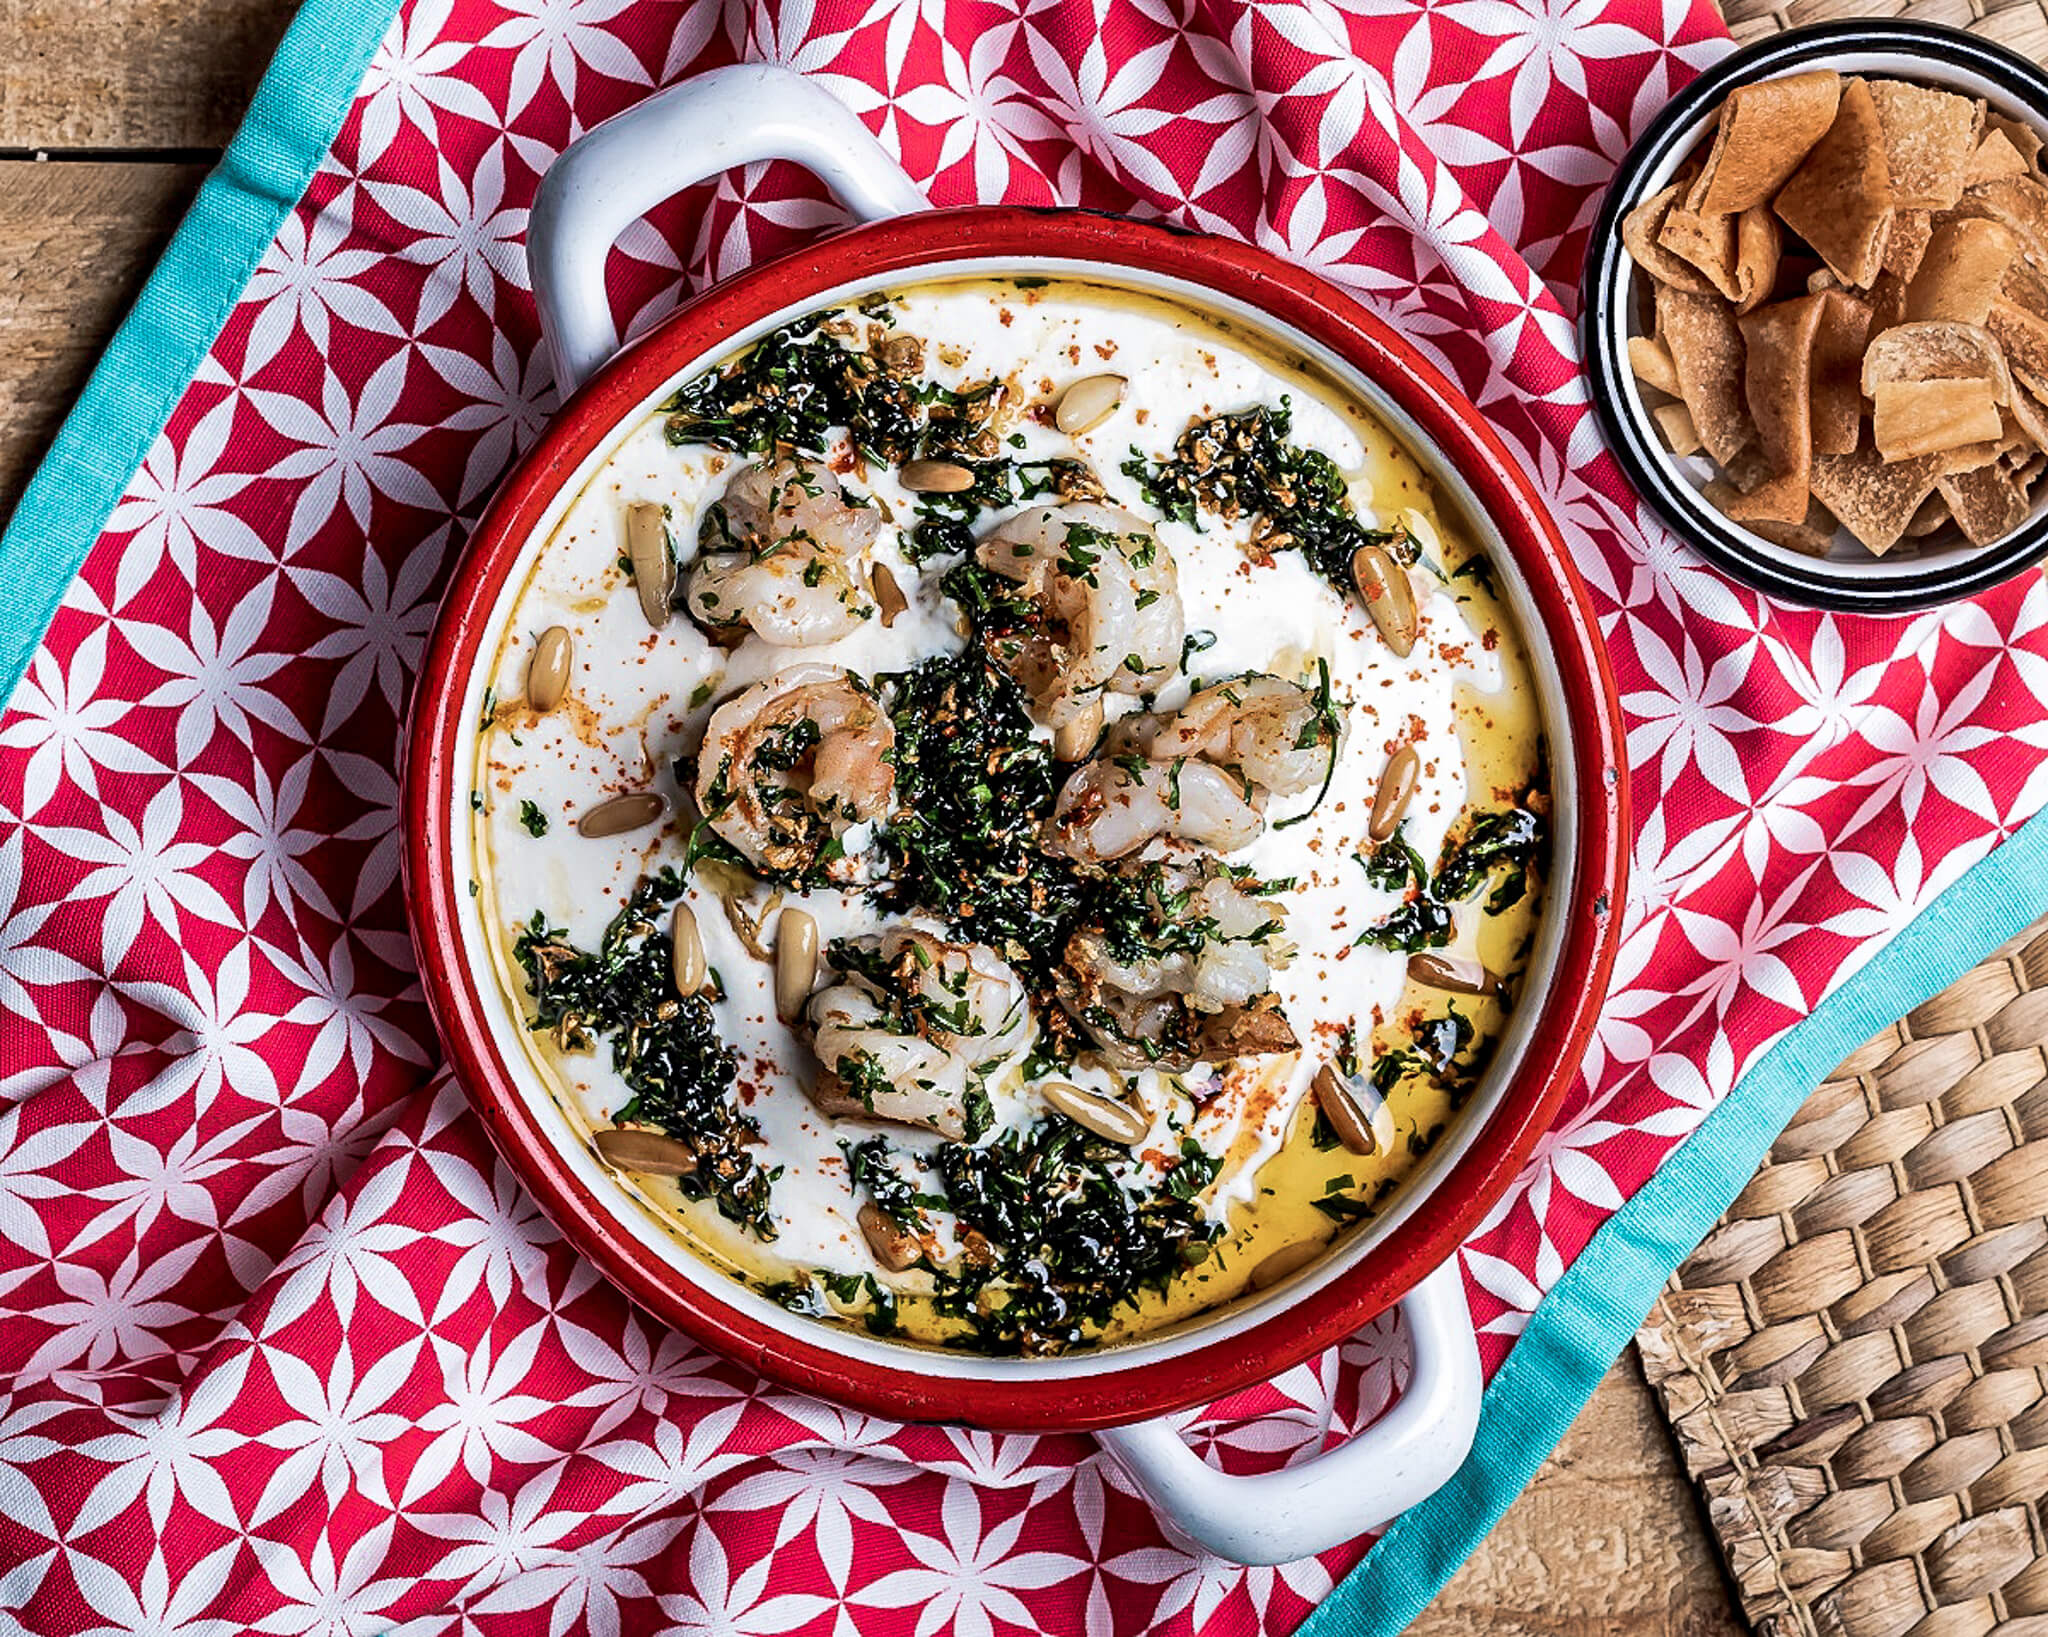 Fatet with shrimps - an example of authentic Levantine dishes from Salam Dakkak.